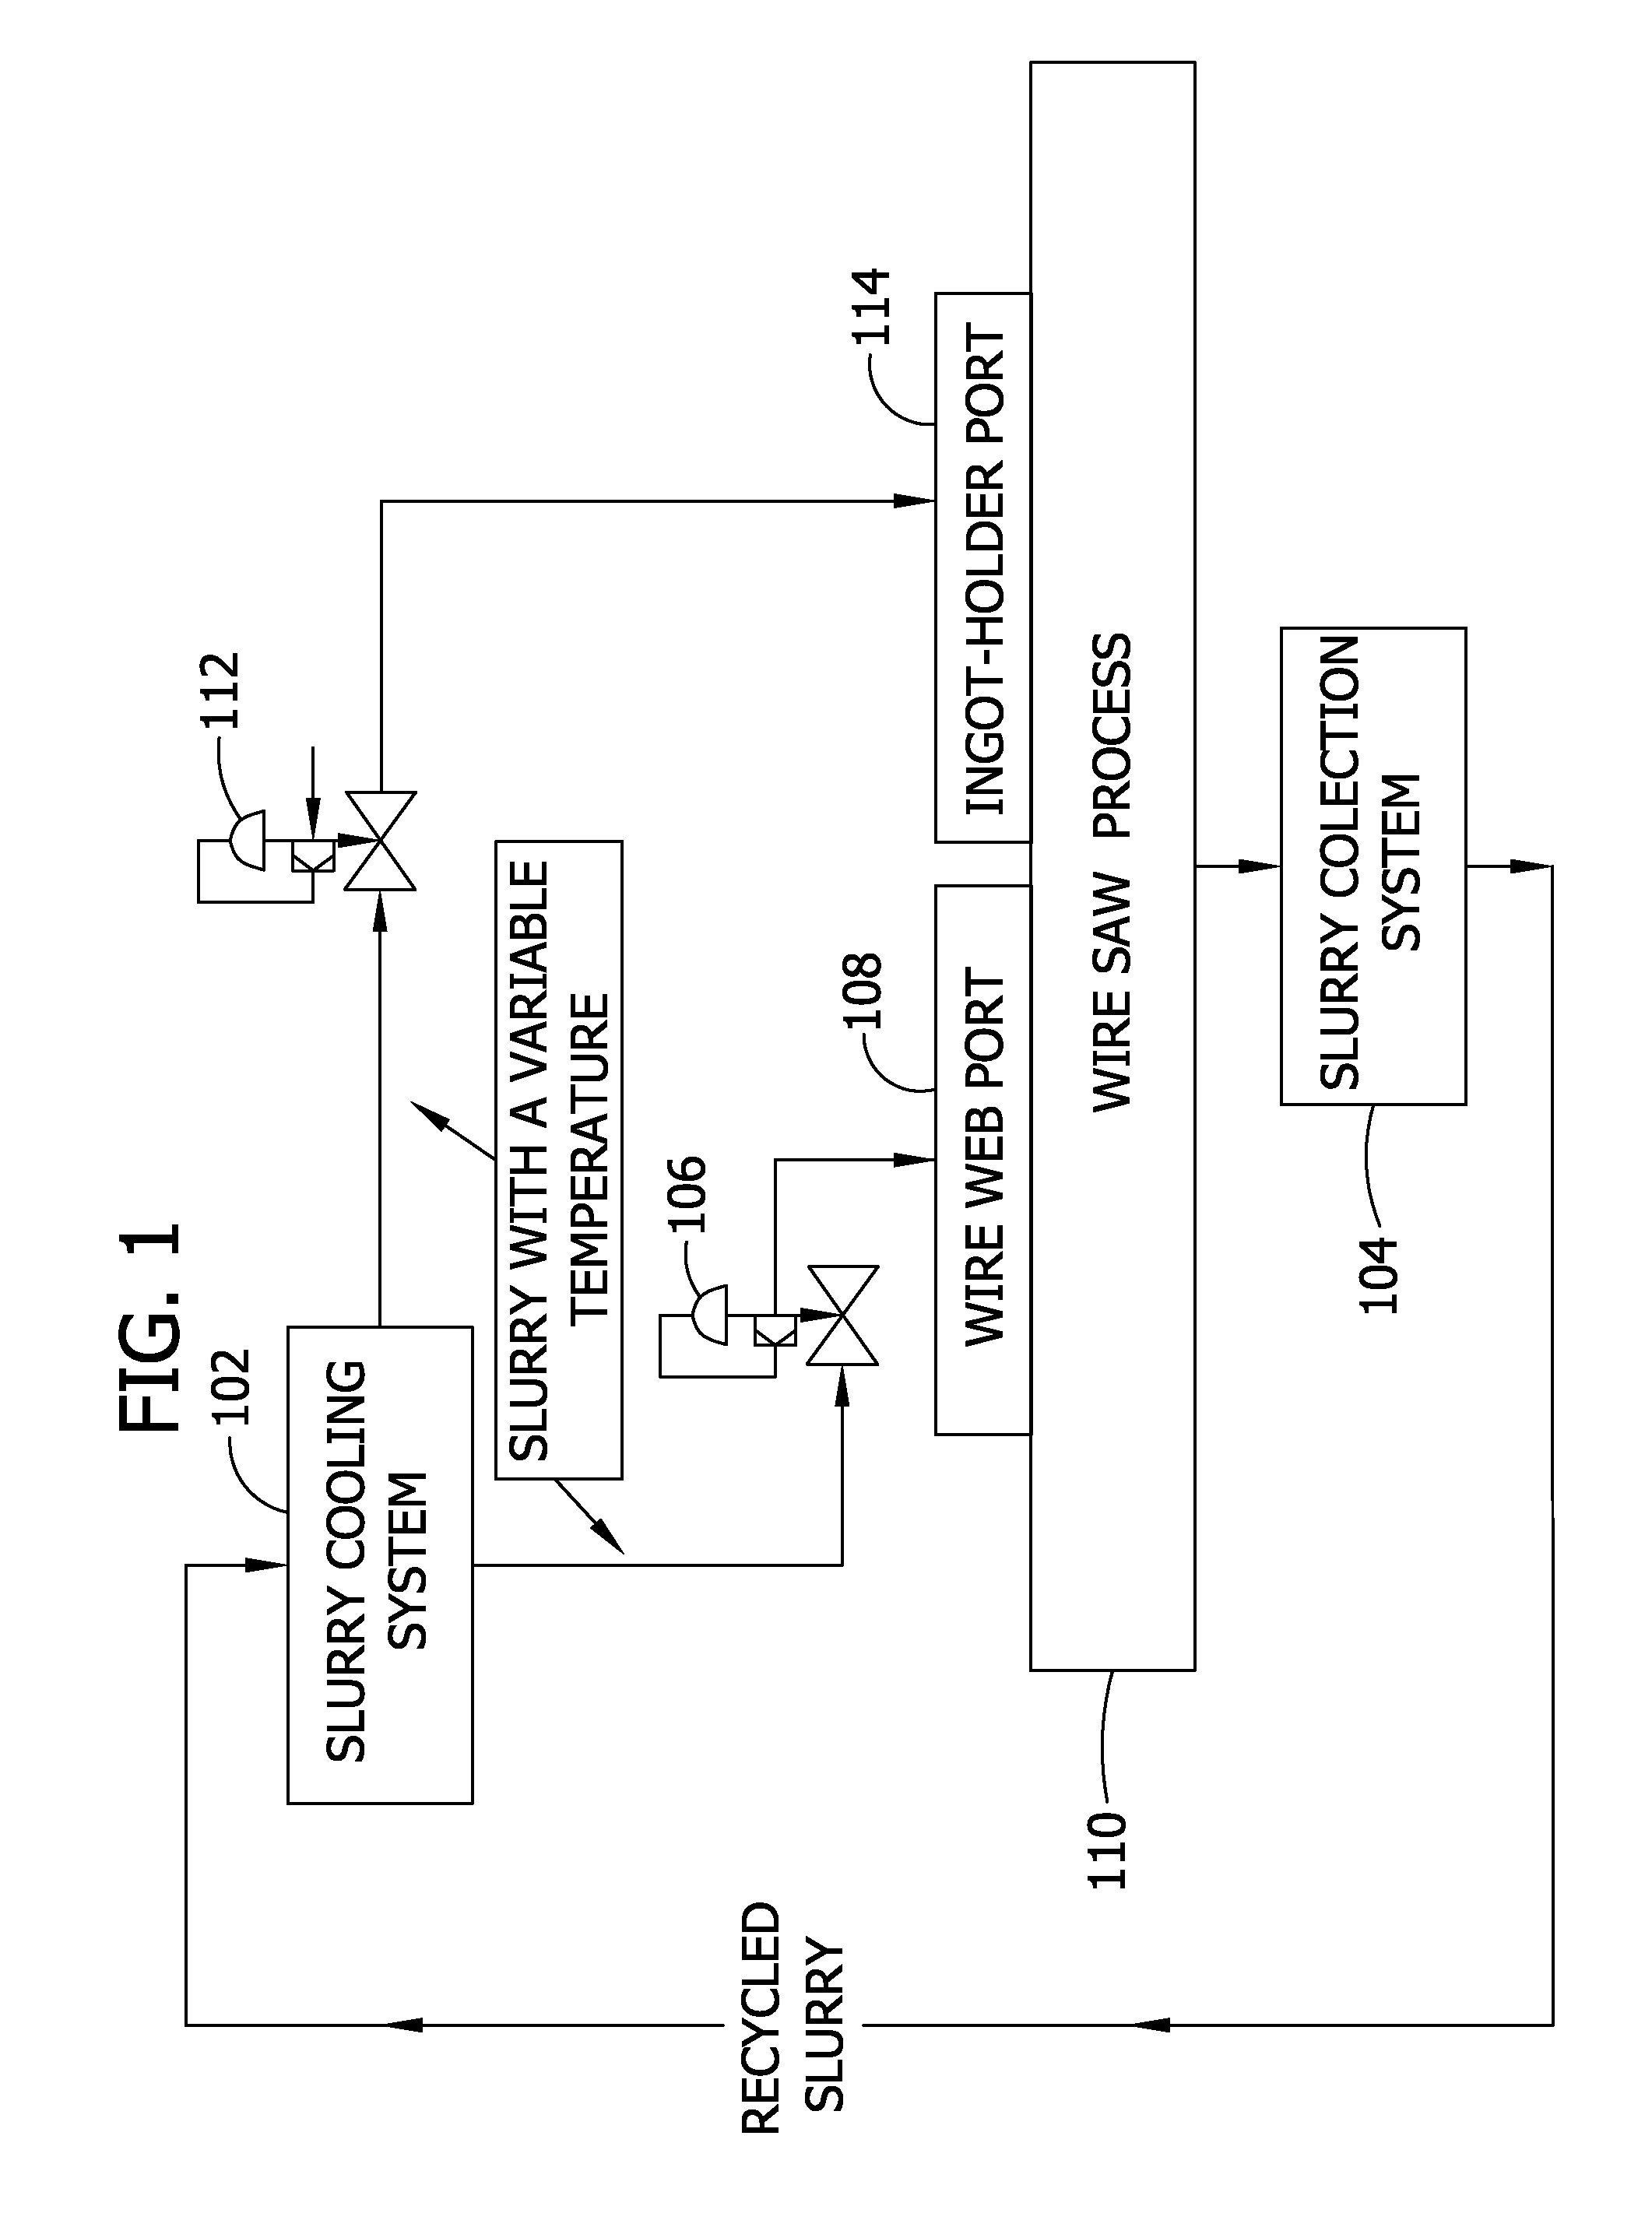 Wire saw ingot slicing system and method with ingot preheating, web preheating, slurry temperature control and/or slurry flow rate control